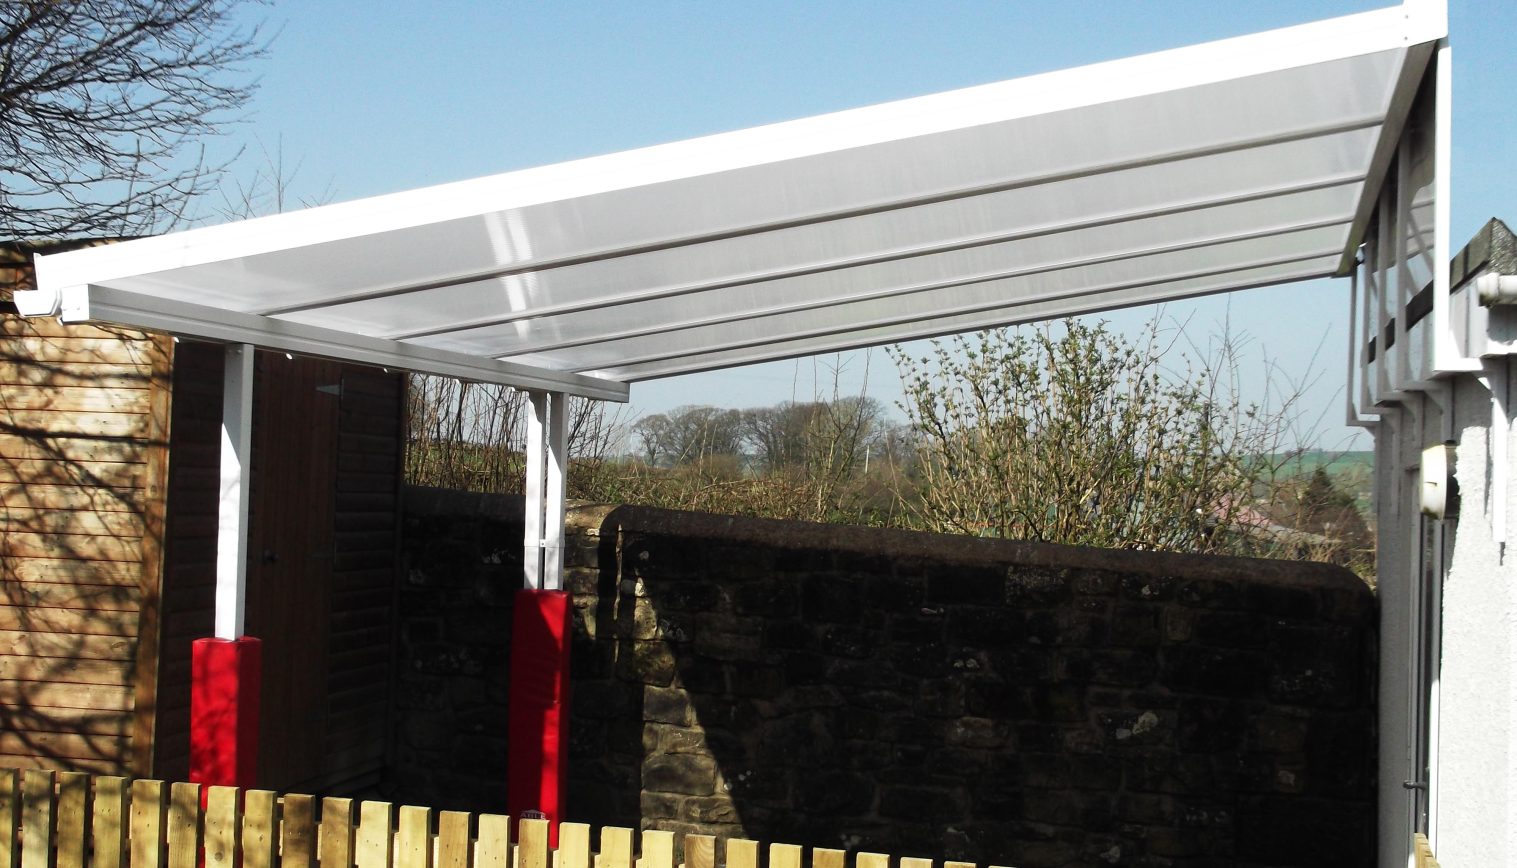 Ireby CE Primary School – Second Wall Mounted Canopy